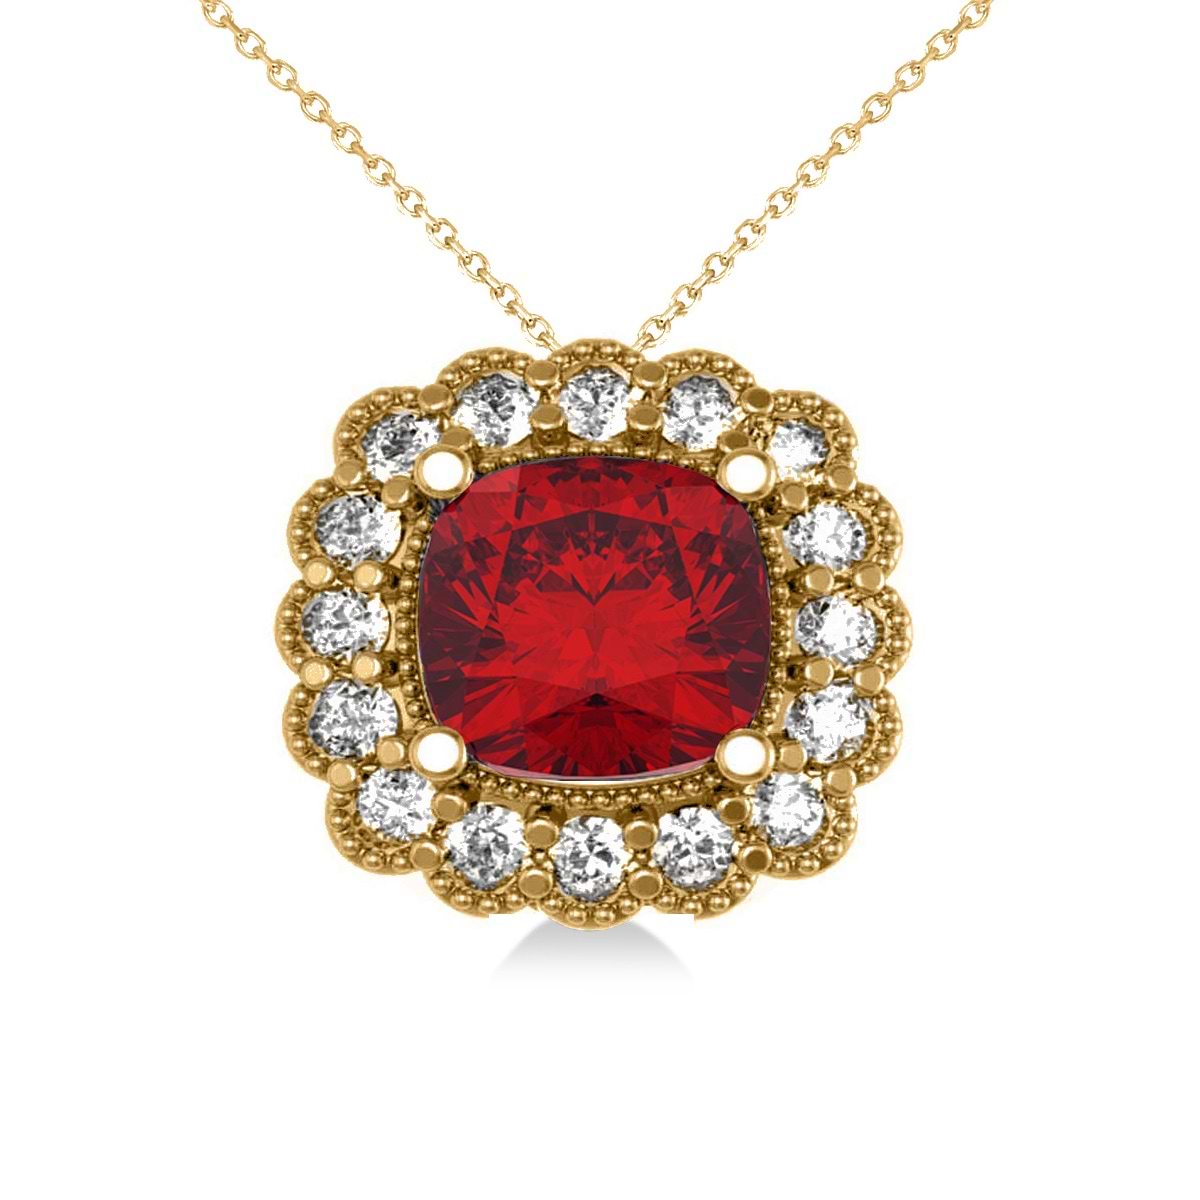 Ruby & Diamond Floral Cushion Pendant Necklace 14k Yellow Gold (3.16ct)